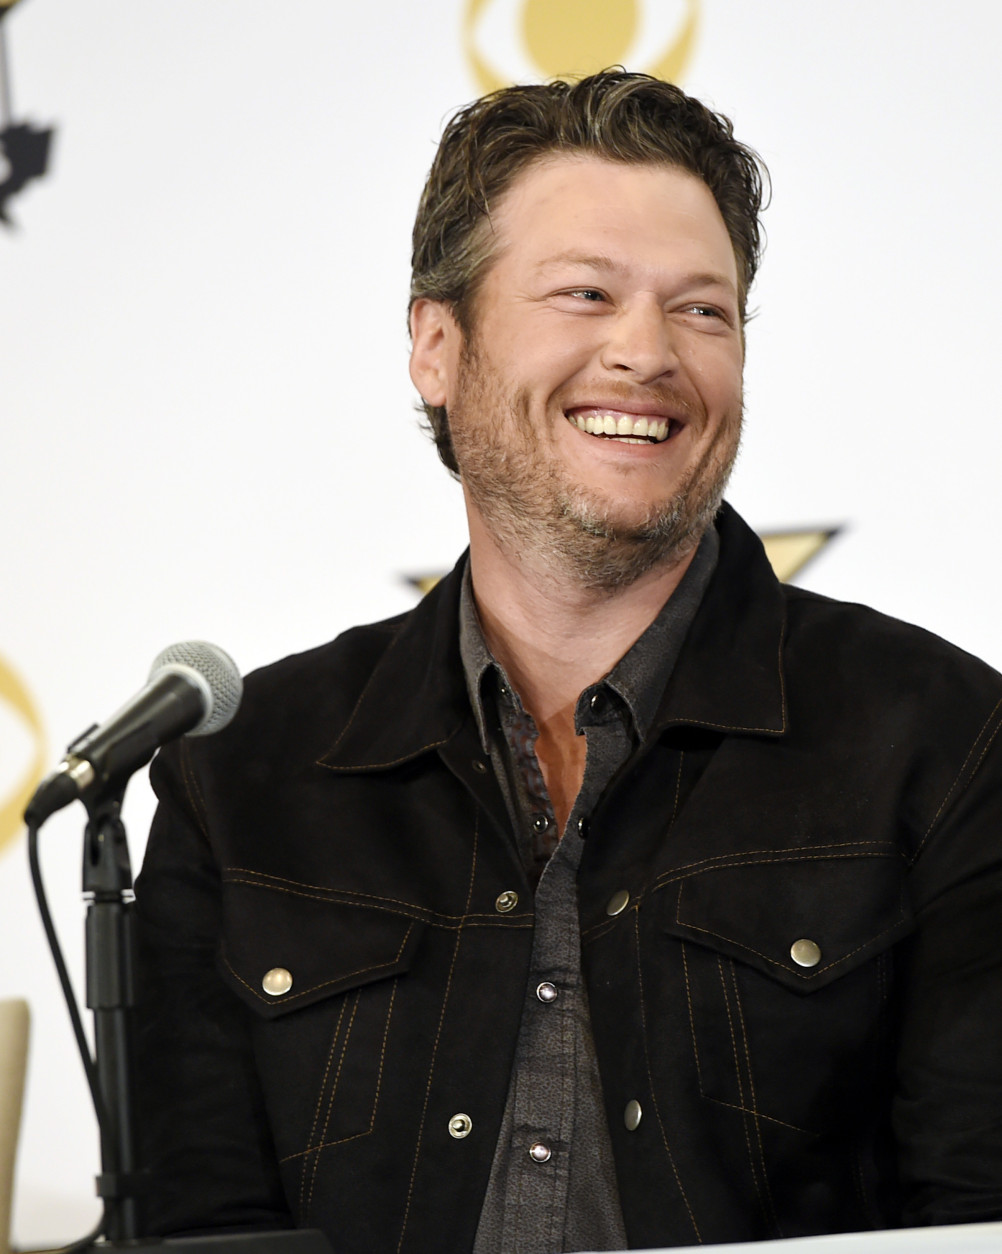 Blake Shelton, co-host of Sunday's 50th Academy of Country Music Awards, takes part in a news conference at AT&amp;T Stadium on Friday, April 17, 2015, in Arlington, Texas. The 50th ACM Awards will be held on Sunday at AT&amp;T Stadium. (Photo by Chris Pizzello/Invision/AP)